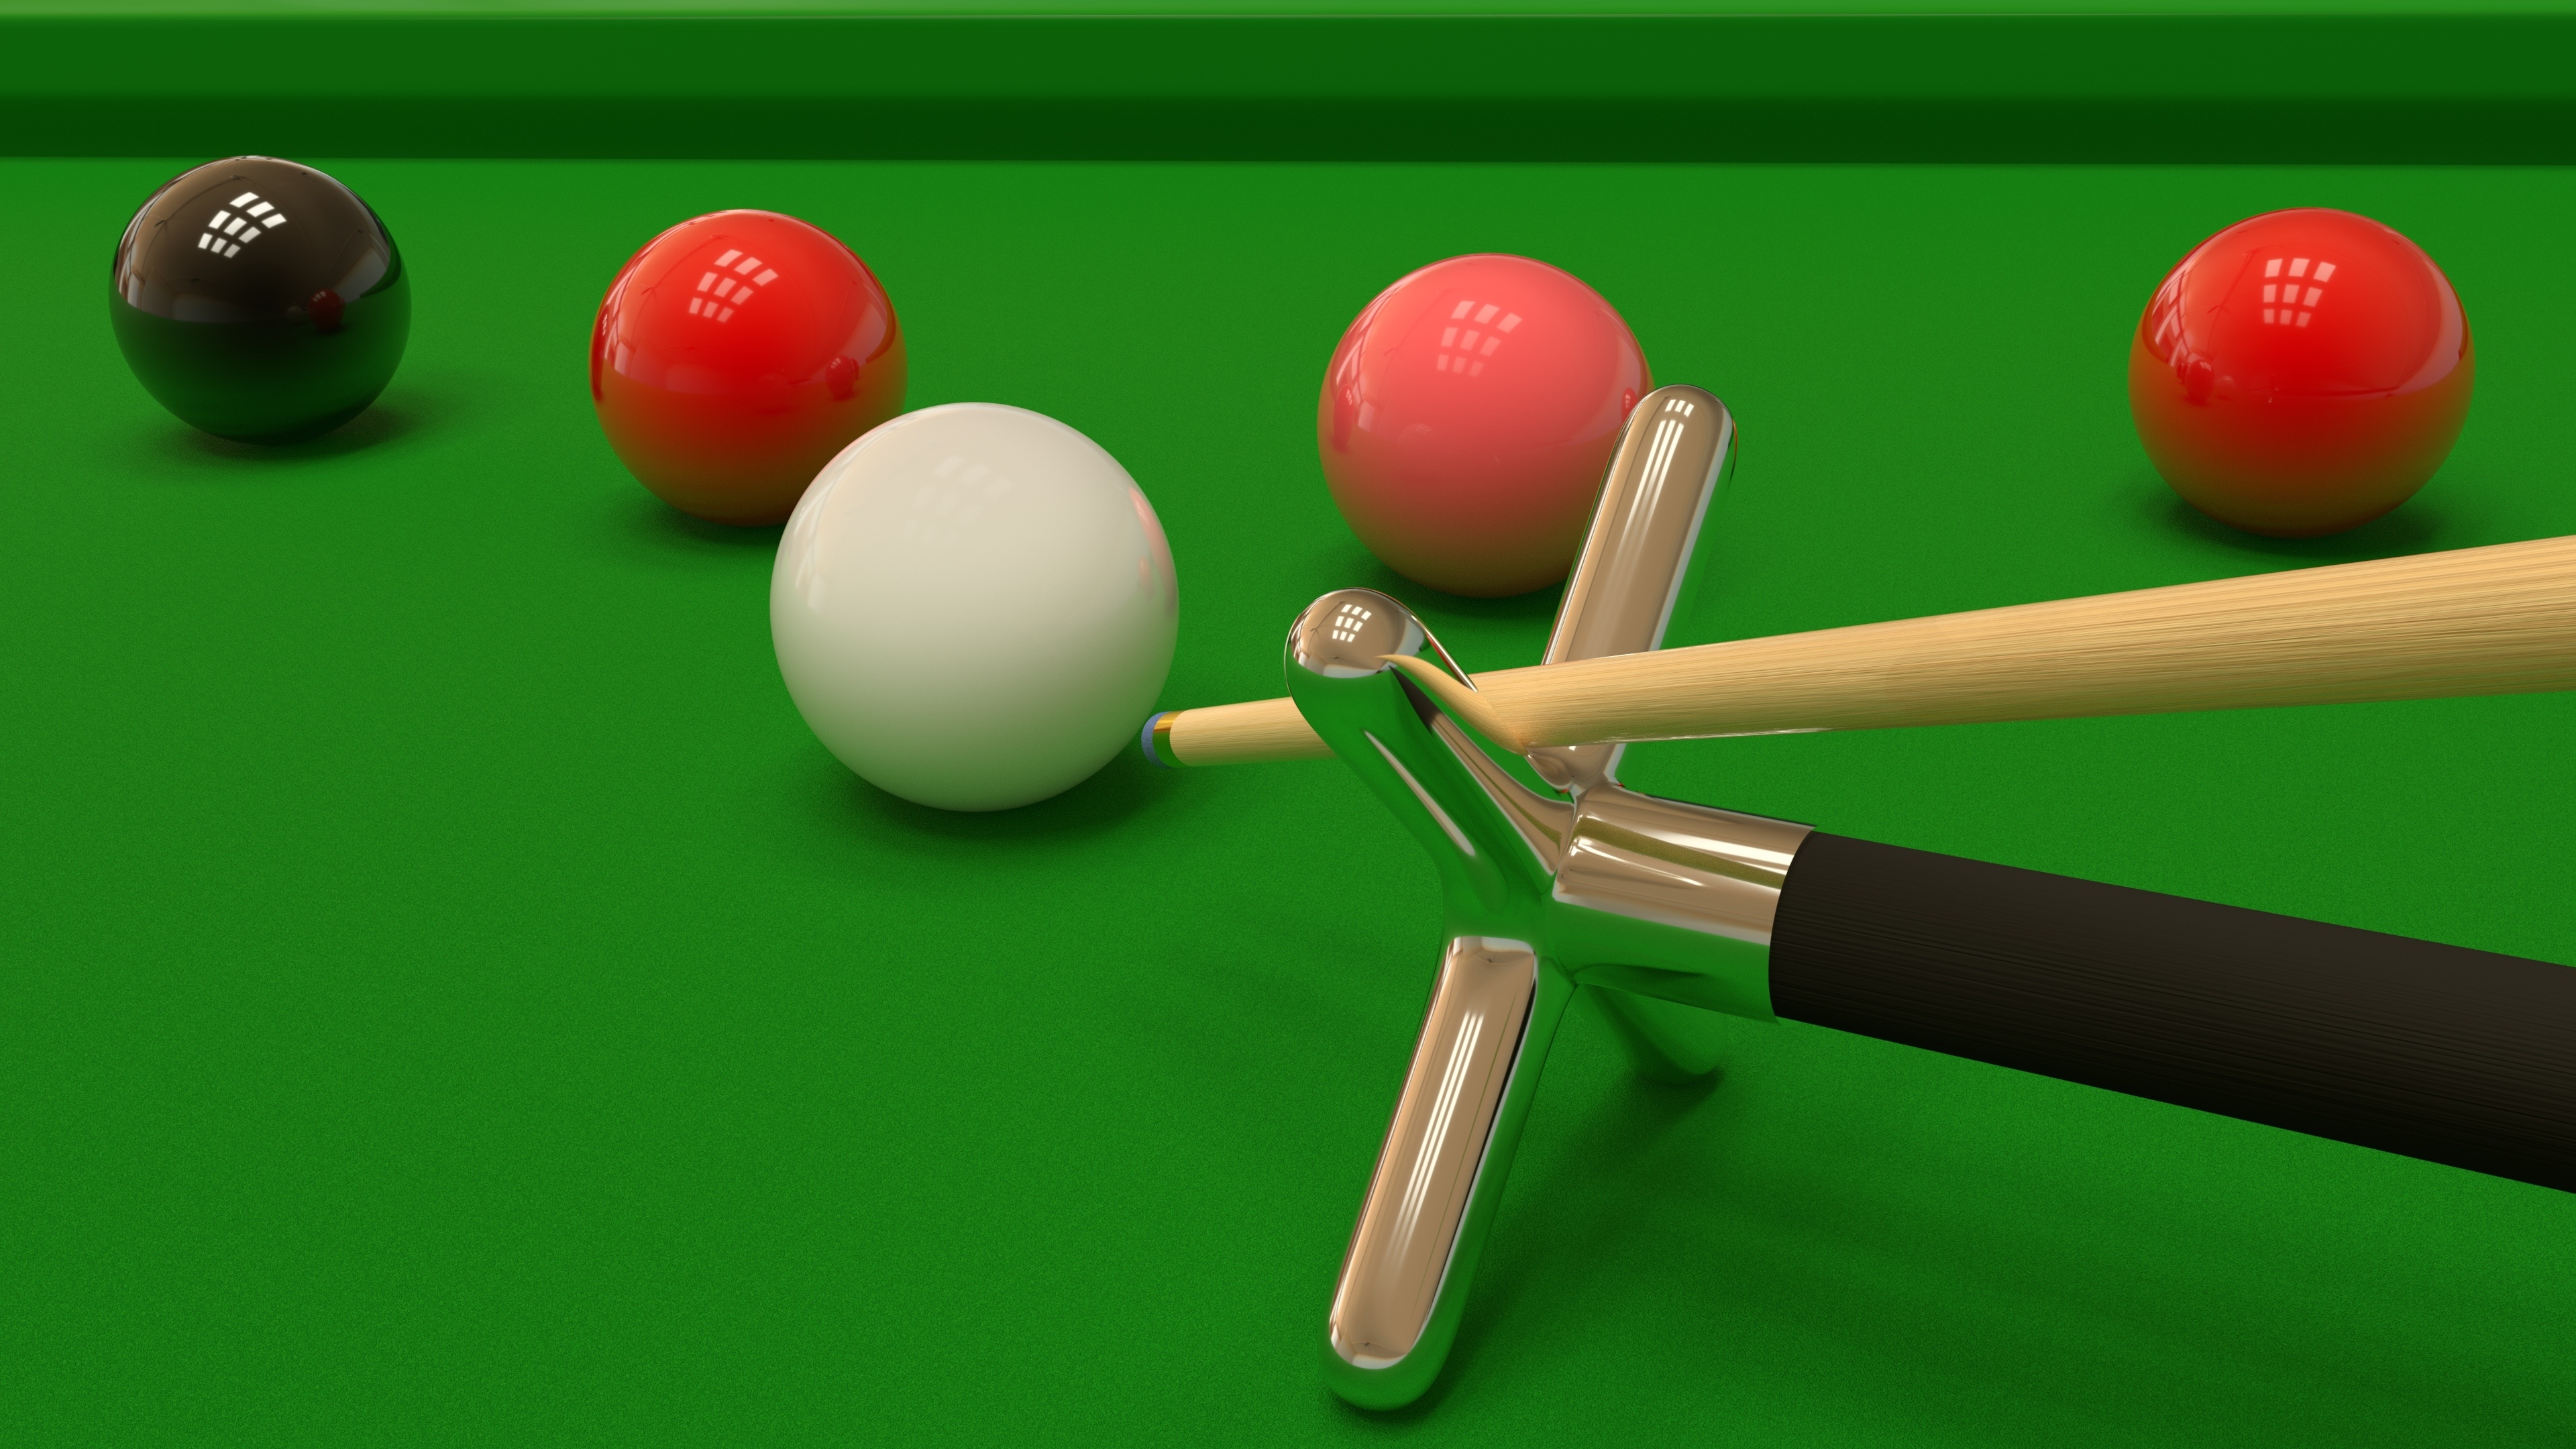 Snooker: 3D rendered model of a cue sports equipment - cue stick, cue ball with four object balls. 3840x2160 4K Background.